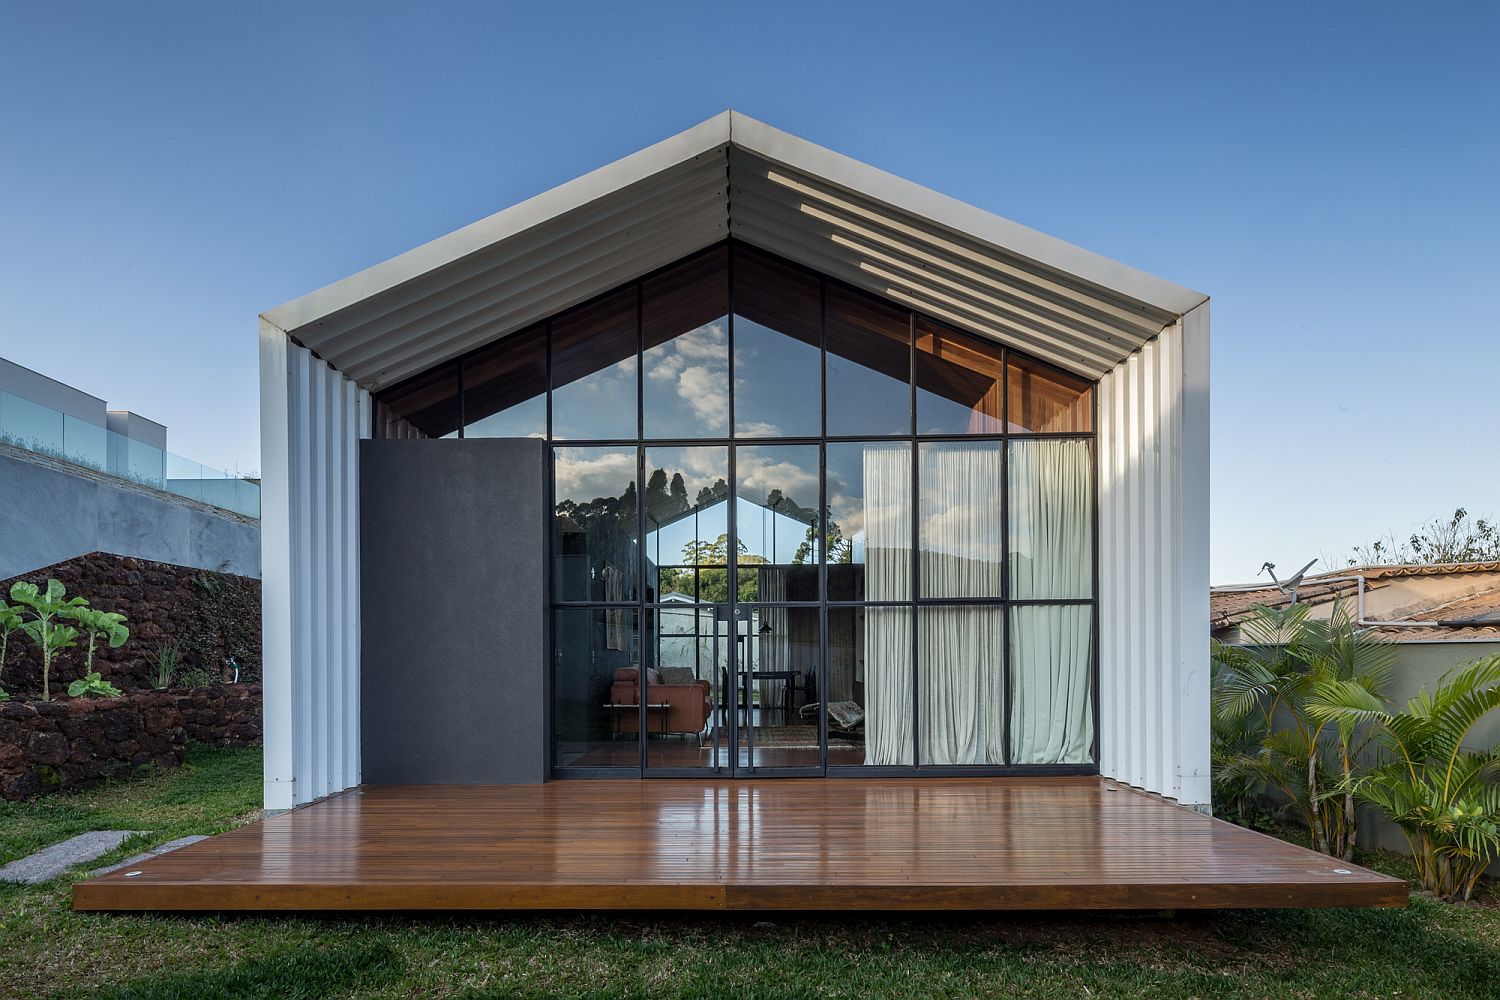 Large glass windows offer visual connectivity with the outdoors